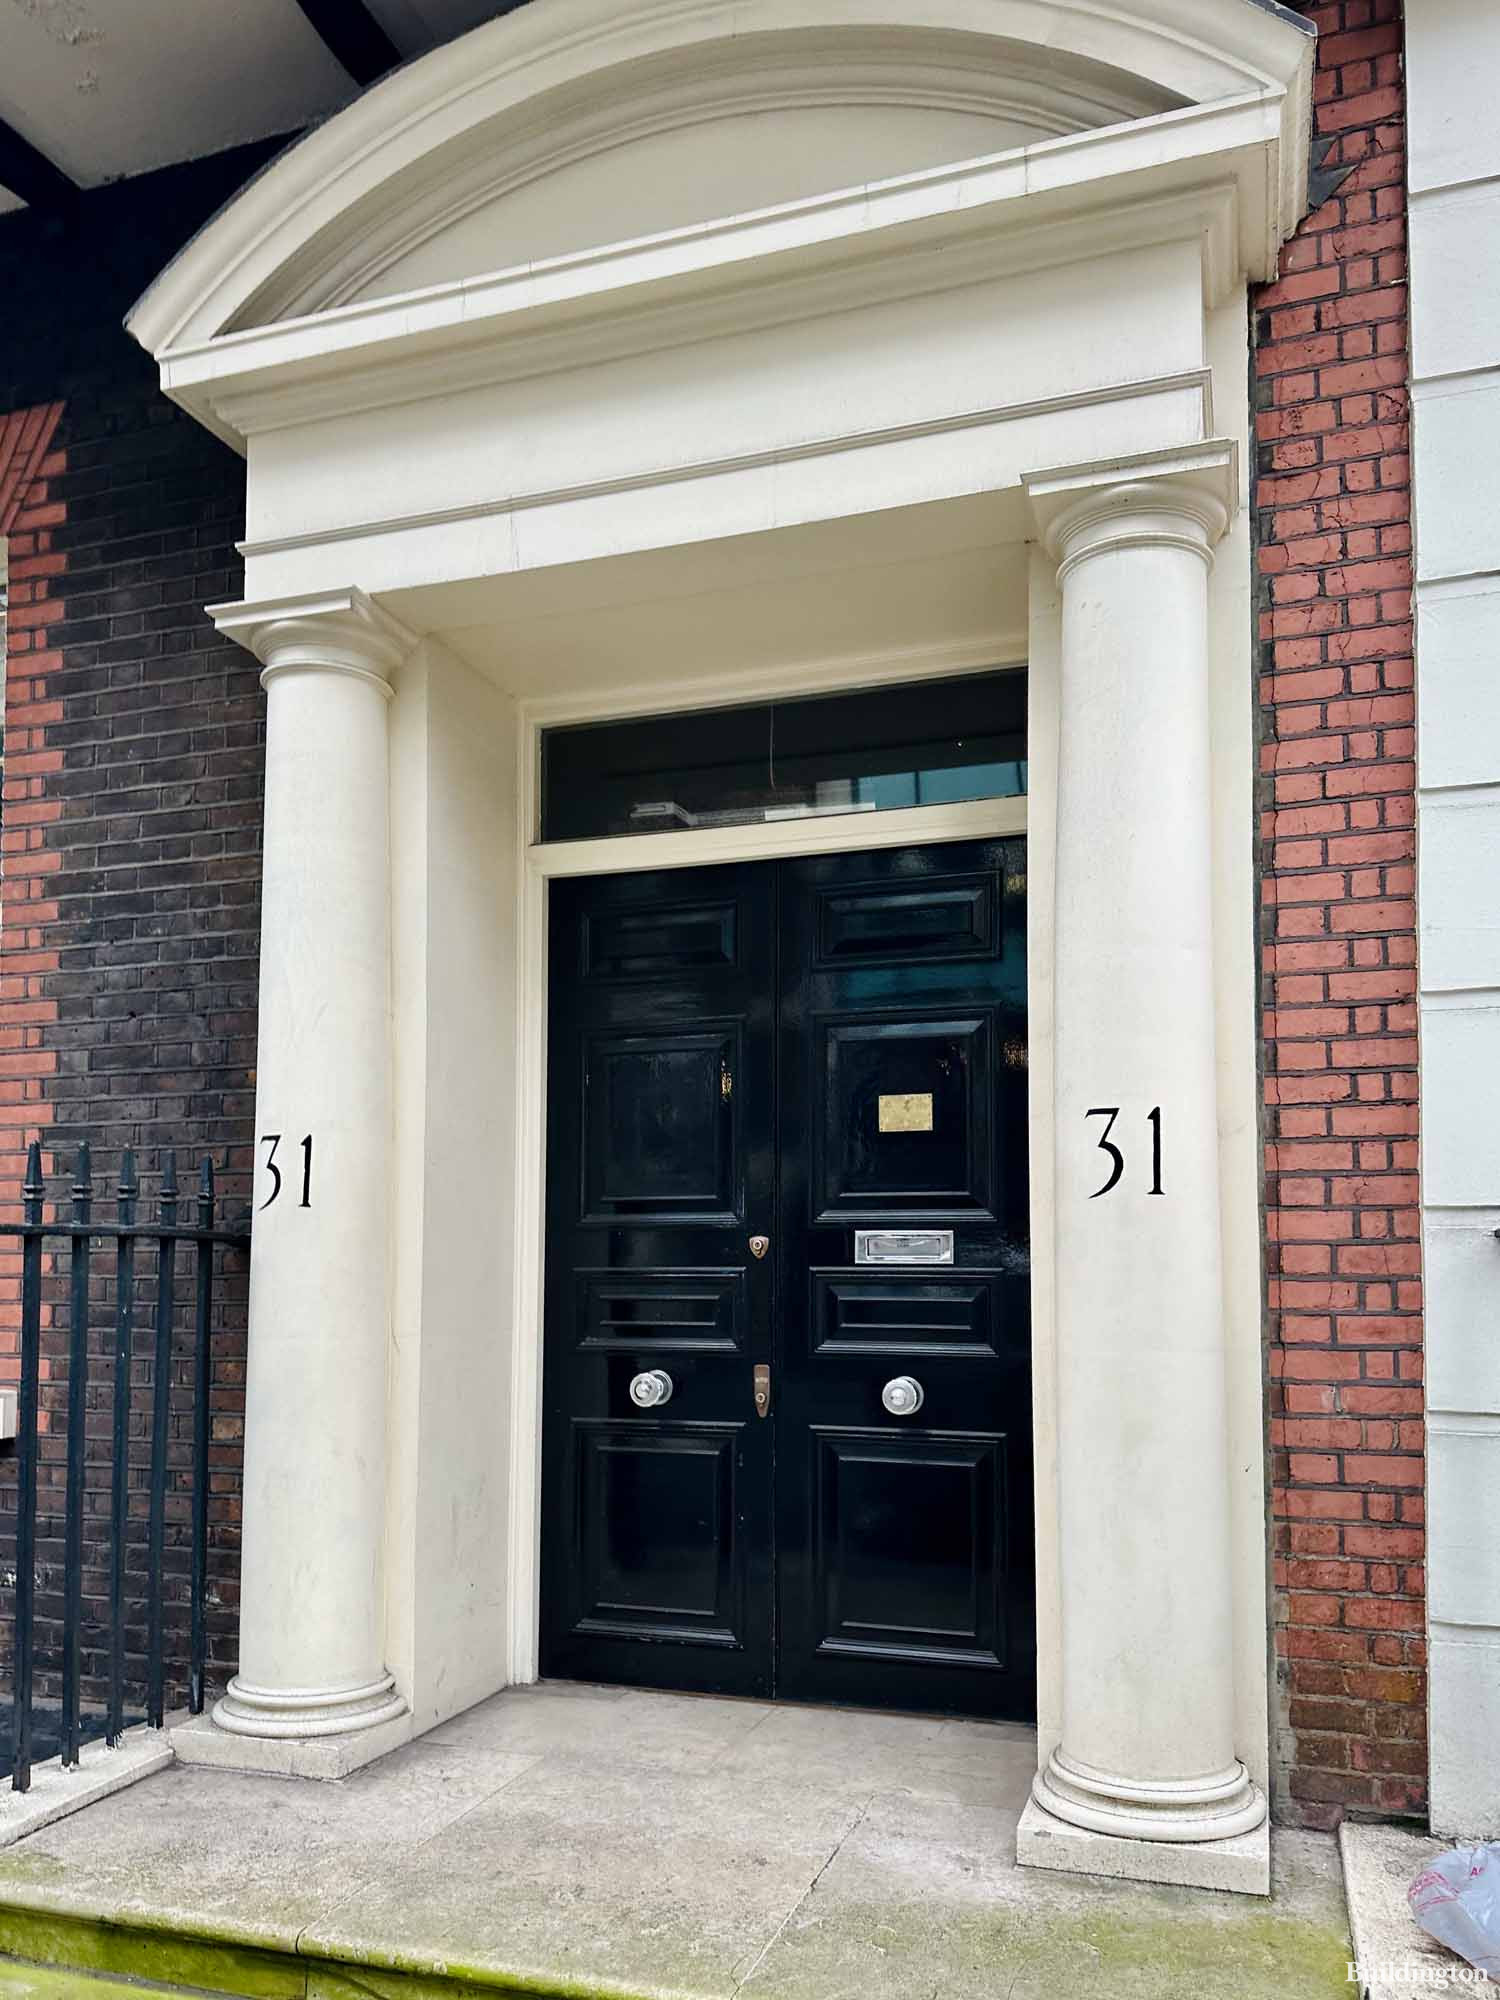 Entrance to 31 Curzon Street building in Mayfair, London W1.